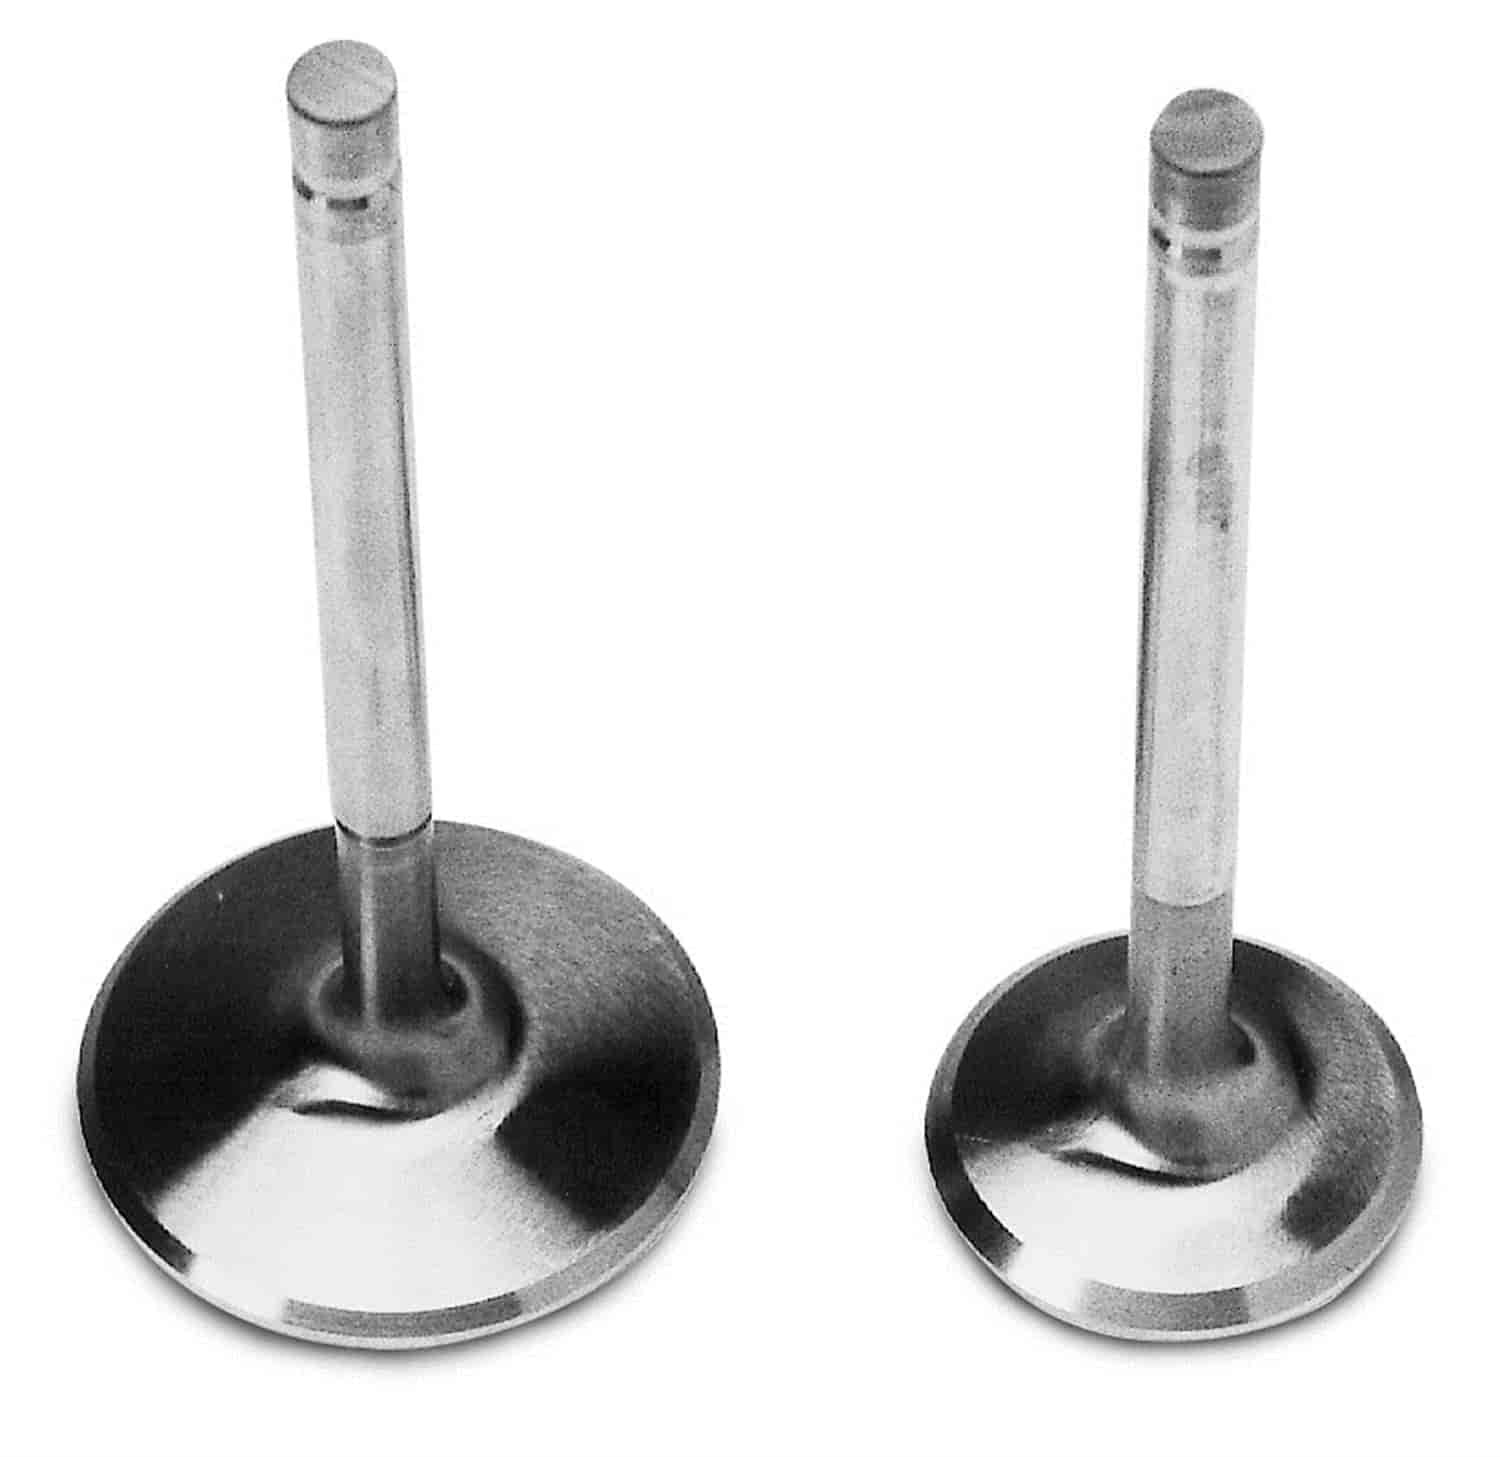 Intake Valve Set 2.19" for Chevy W-Series Performer RPM Heads #350-60809 & 350-60819